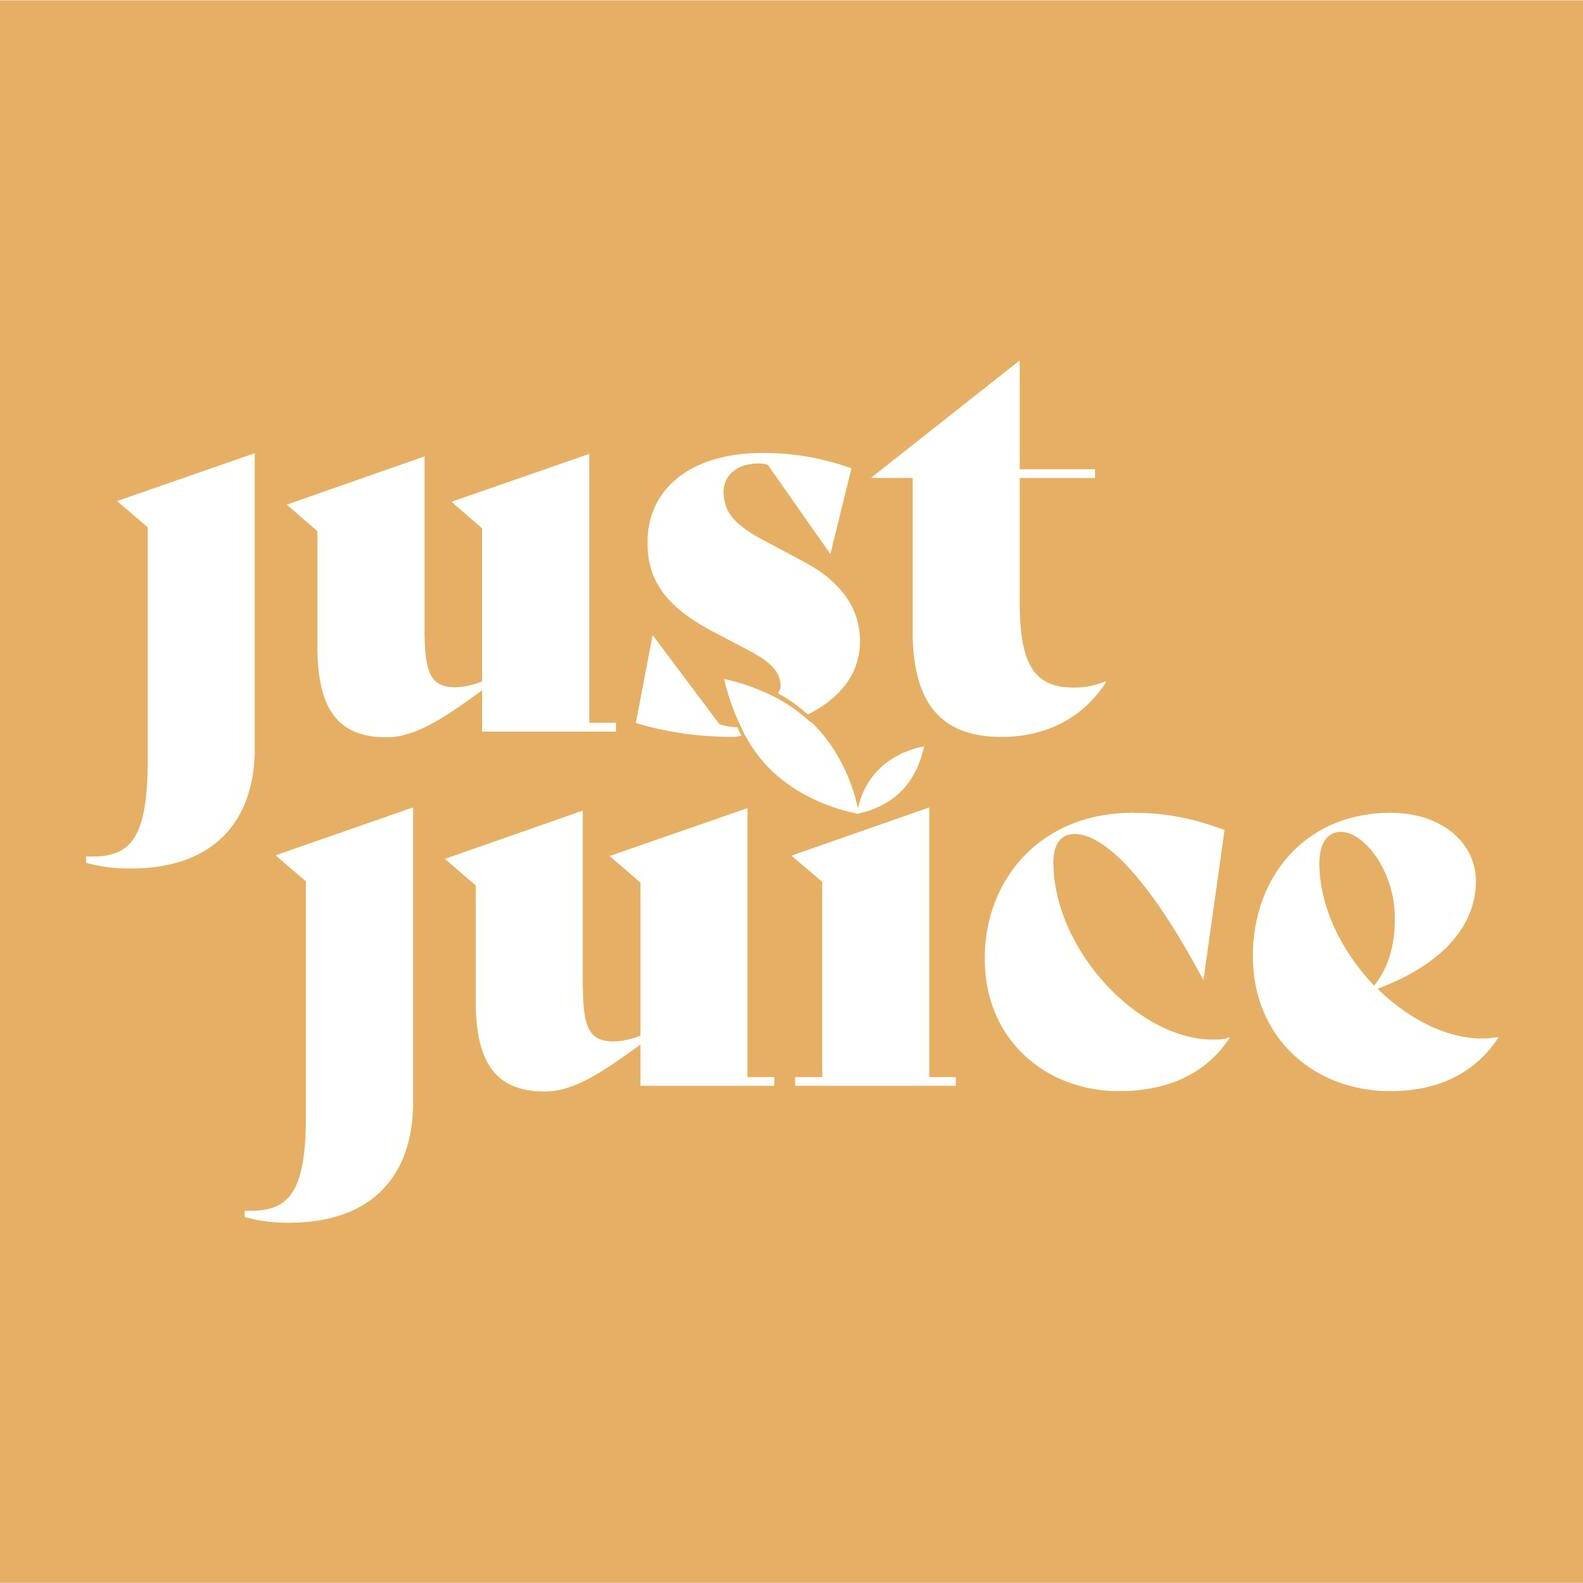 Logo created for a design challenge

Tap the link in my bio to see more of my work!

#graphicdesign #graphicdesigner #logo #logodesign #mockup #brand #brandidentity #packaging #packagingdesign #wordmark #juice #food #foodbrands